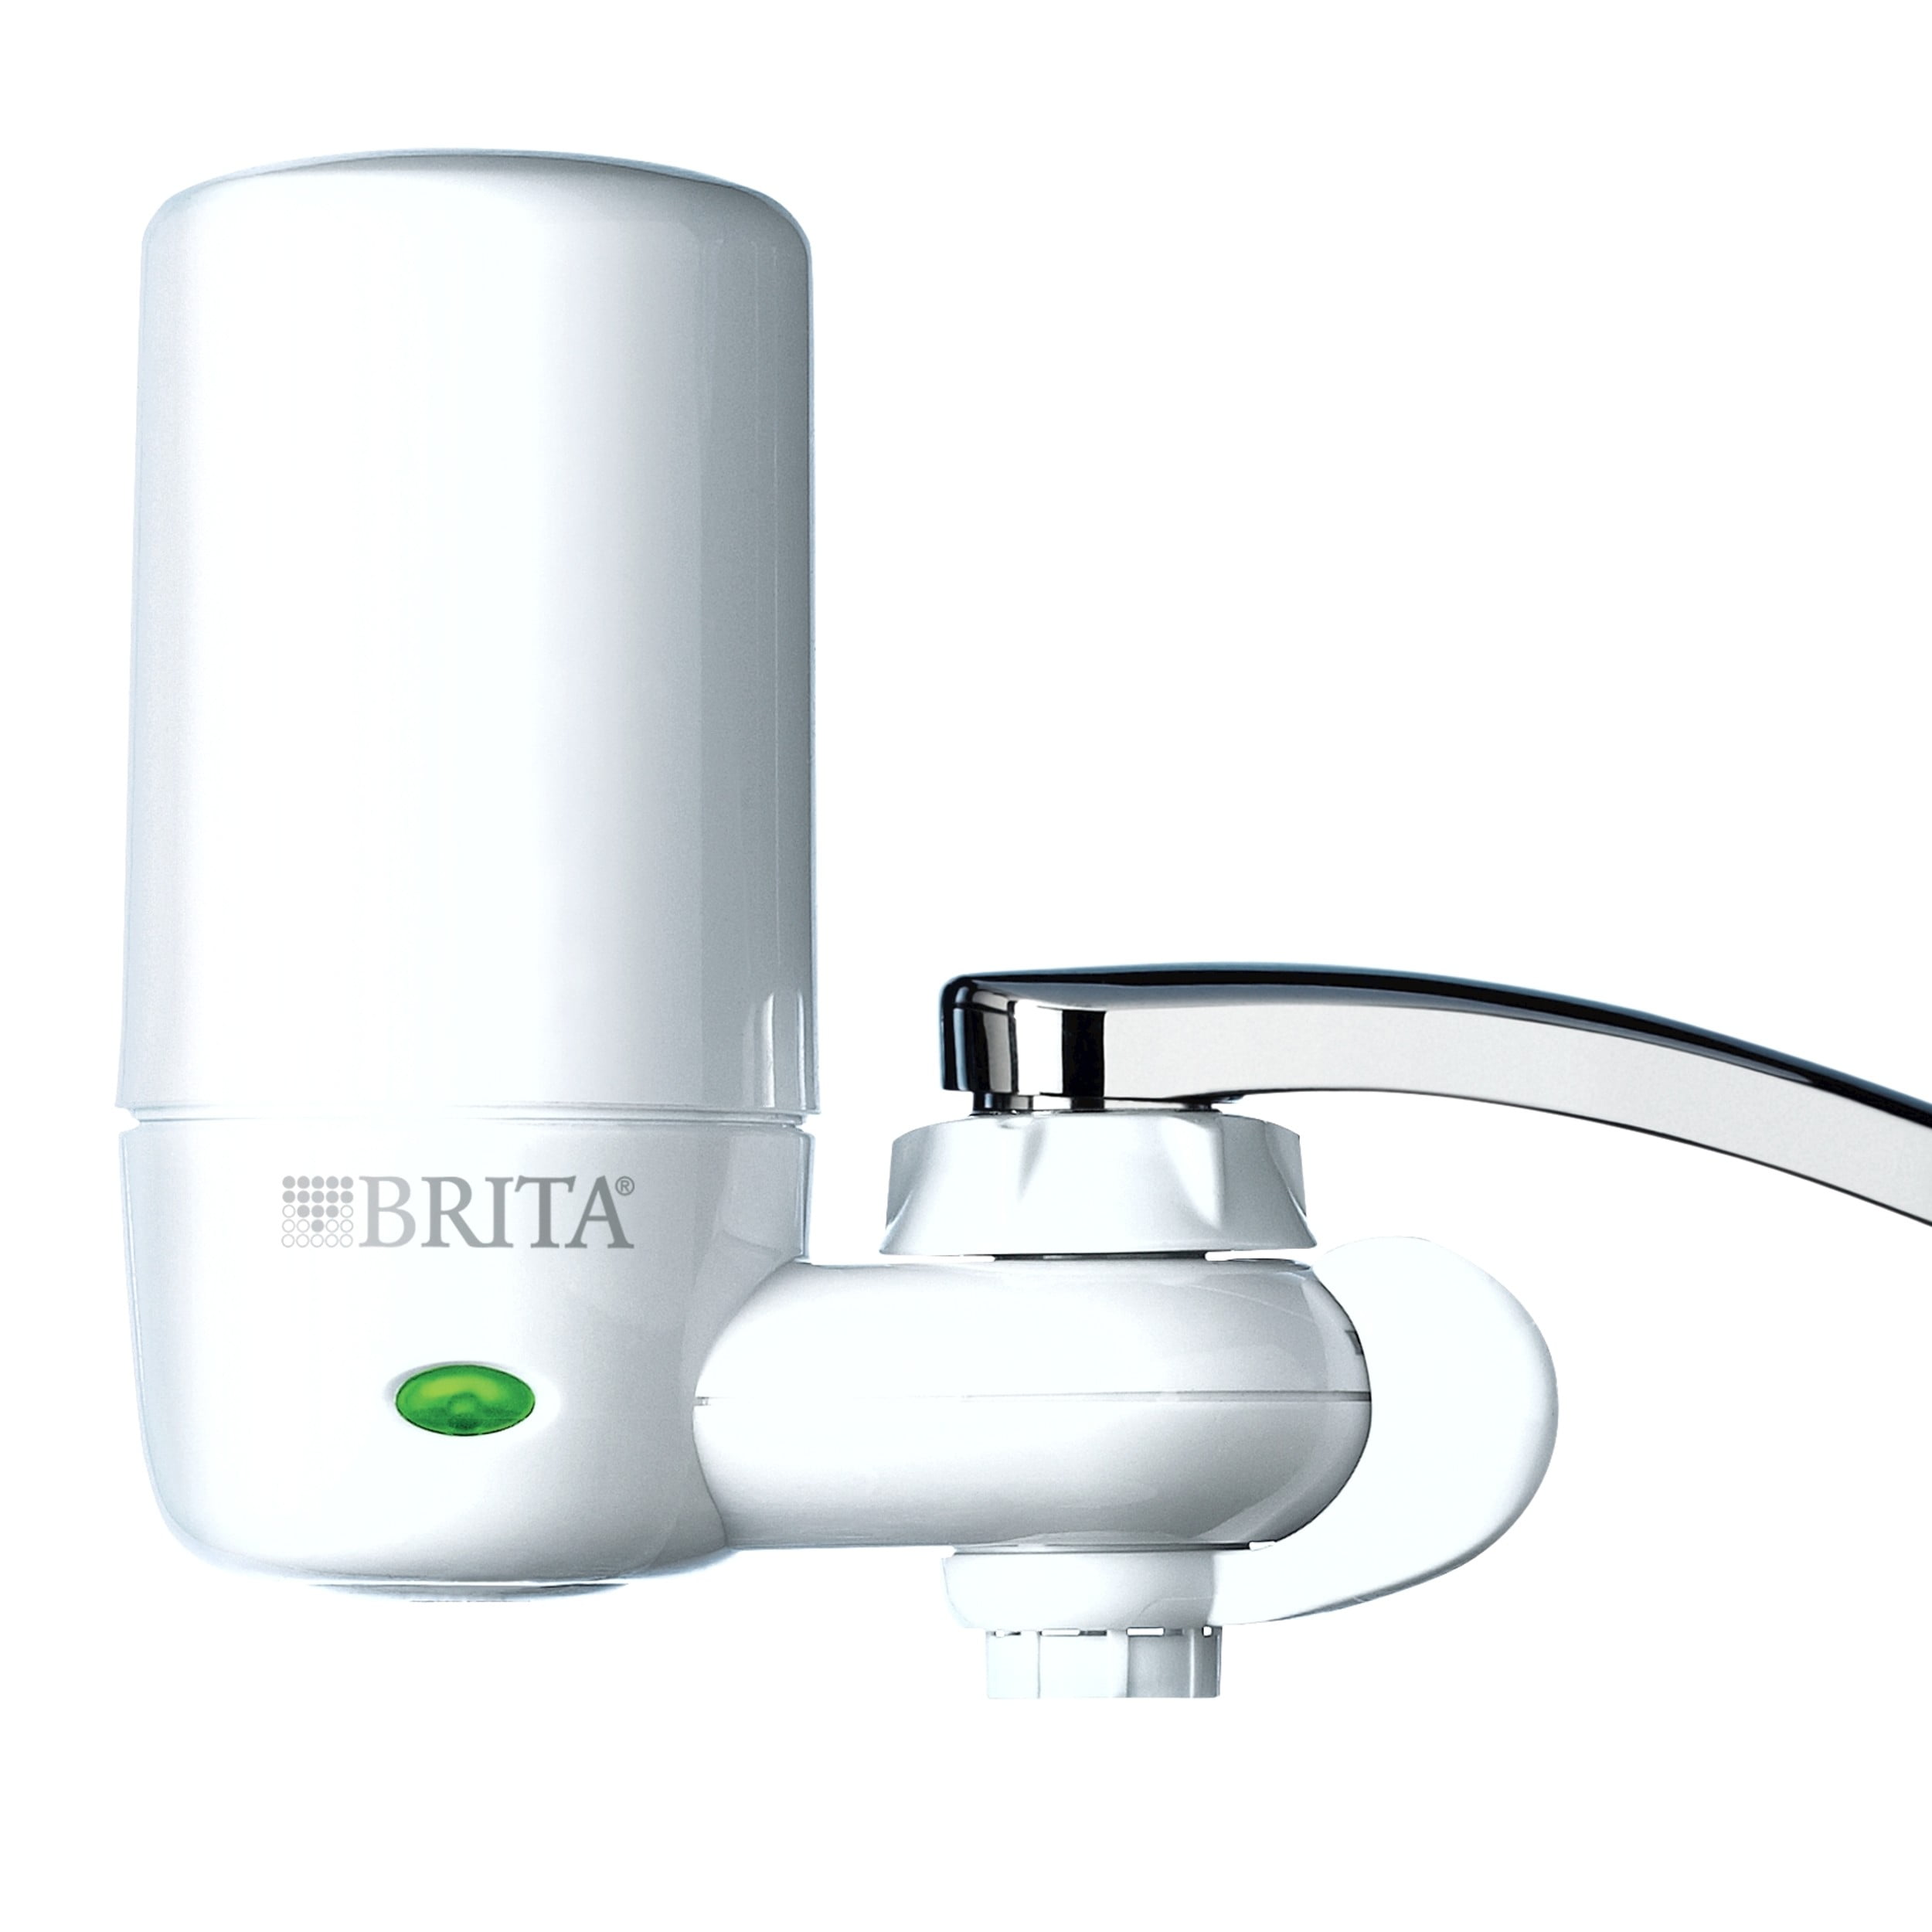 Brita Complete Faucet Mount System, Water Filter Reduces Lead and Chlorine, White